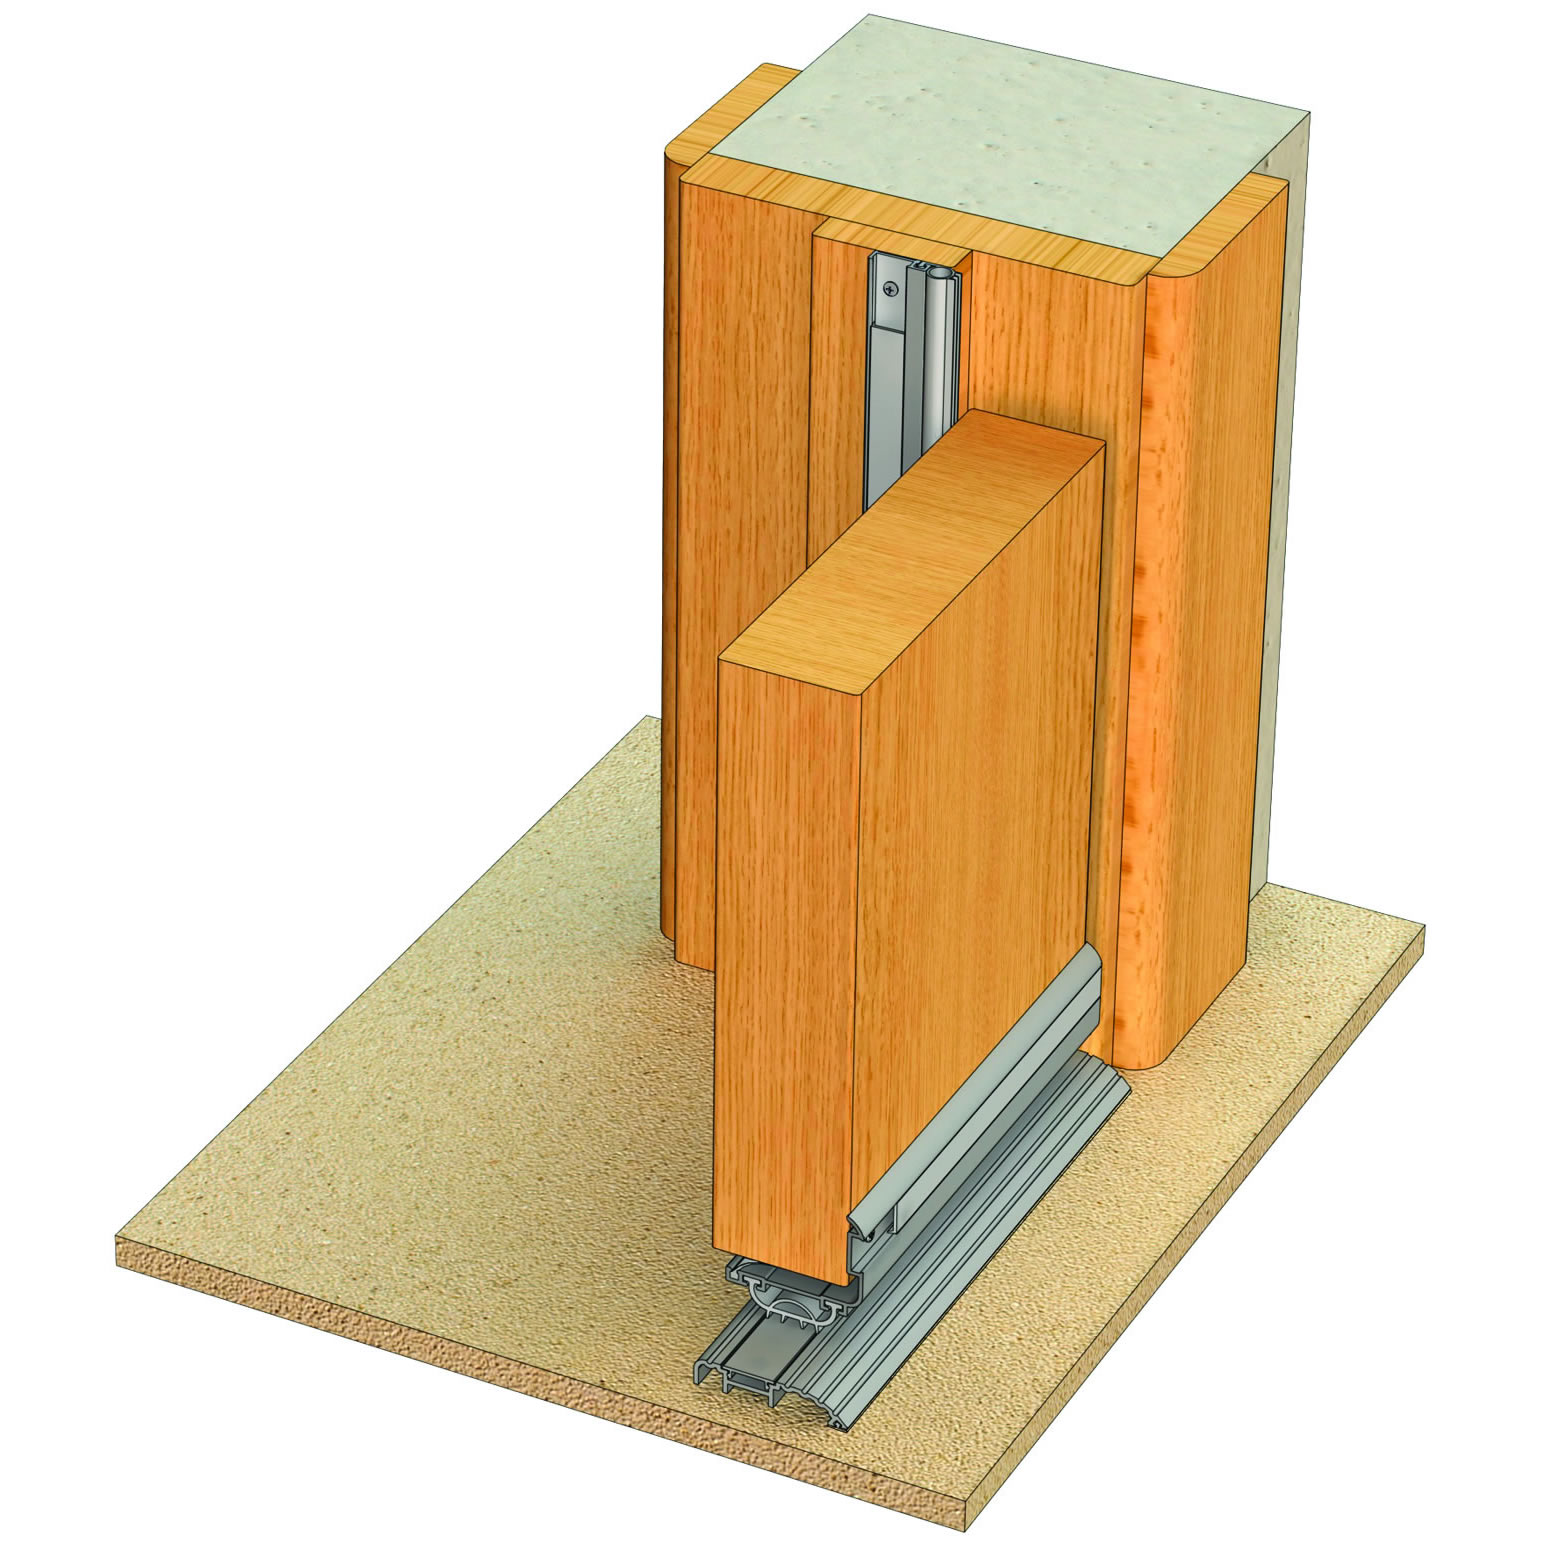 Kilargo system for Non-rated, Double Leaf, Solid Core Door in Timber Frame.